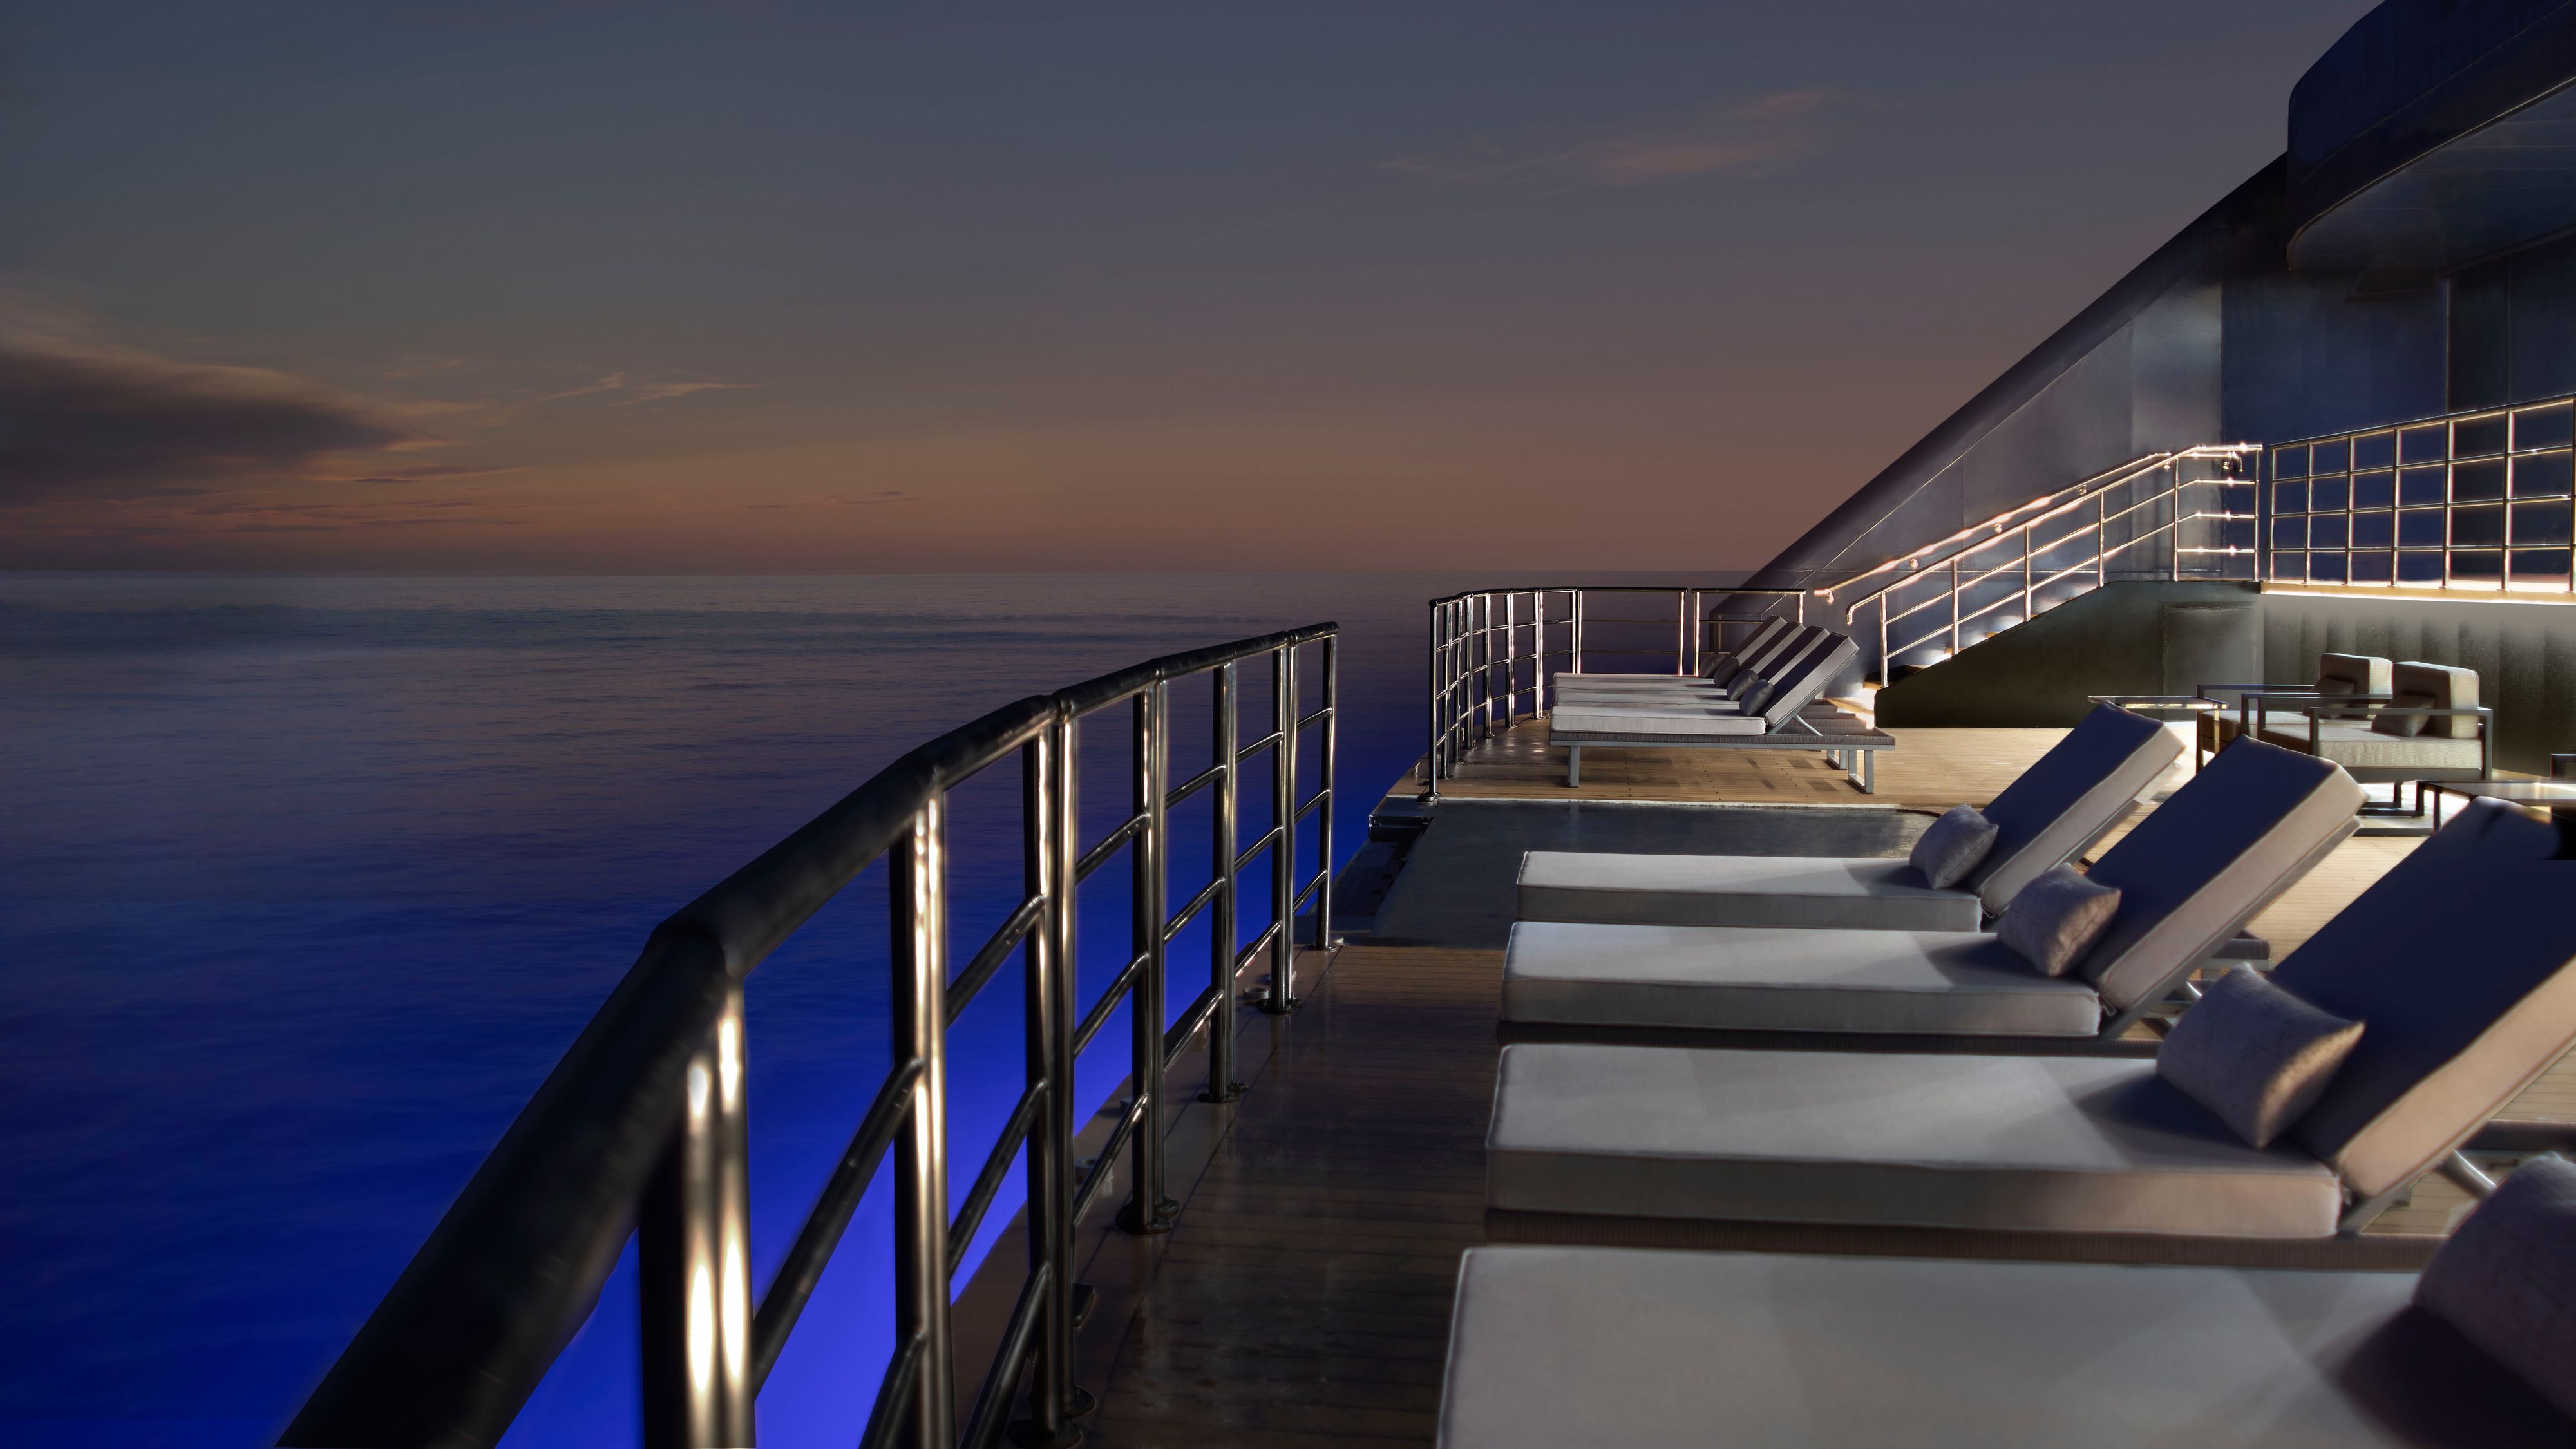 Photos: See Ritz-Carlton's New Luxury Cruise for Over $4,000 a Person